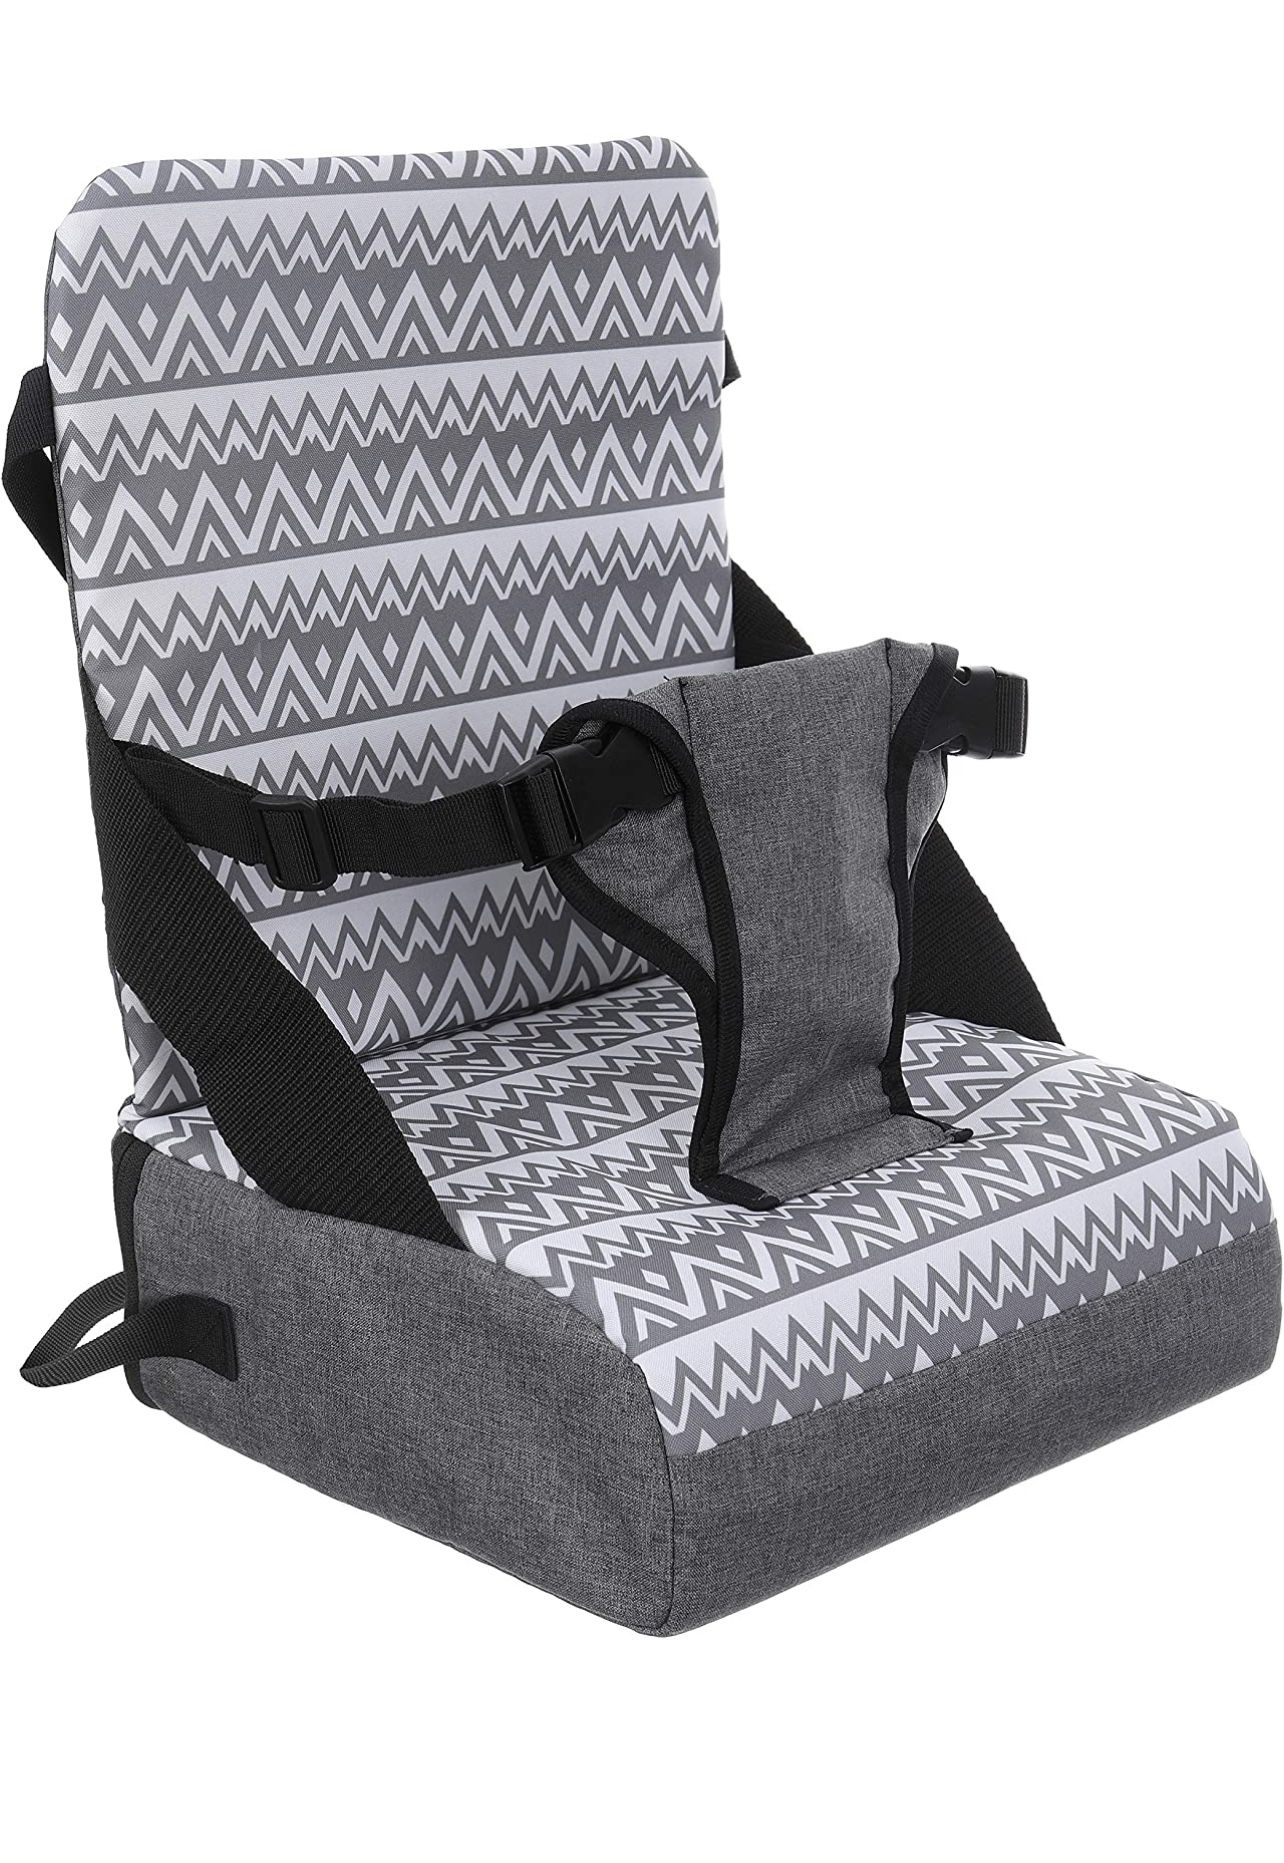 Dreambaby Grab 'n Go Travel Booster Seat - with Adjustable Securing Straps